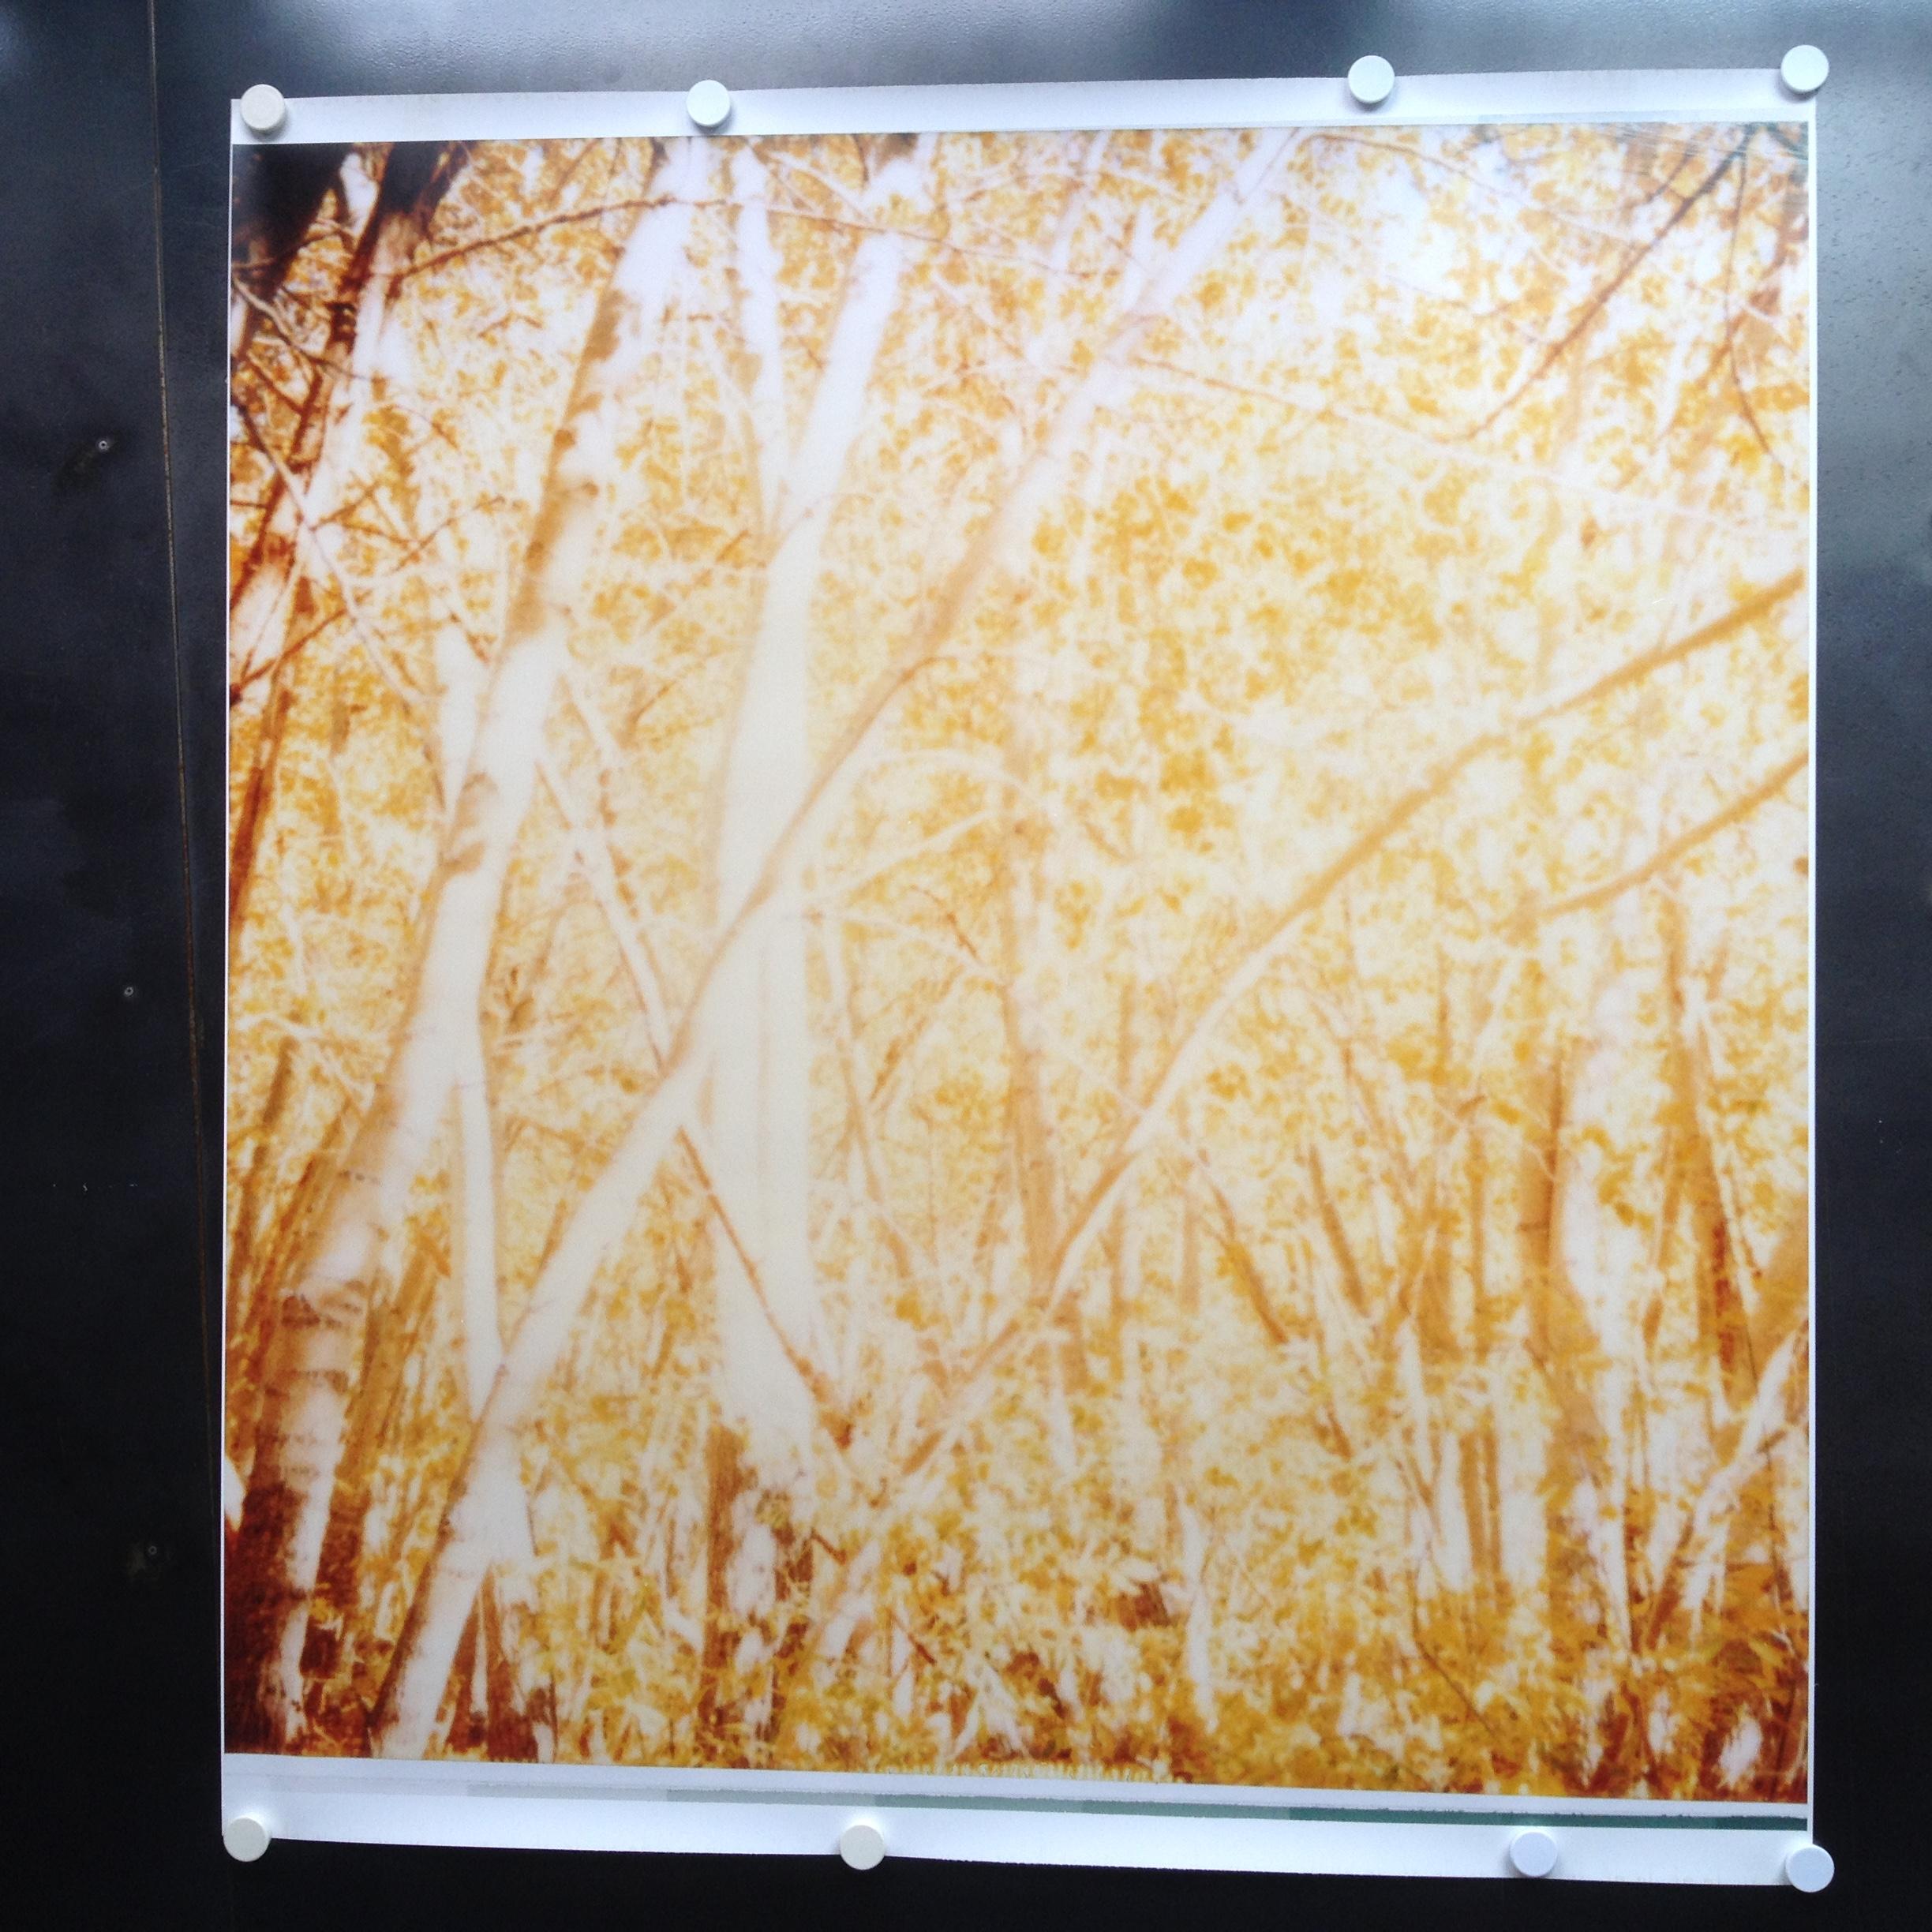 Indian Summer IV  - The Last Picture Show, analog, 128x126cm - Photograph by Stefanie Schneider